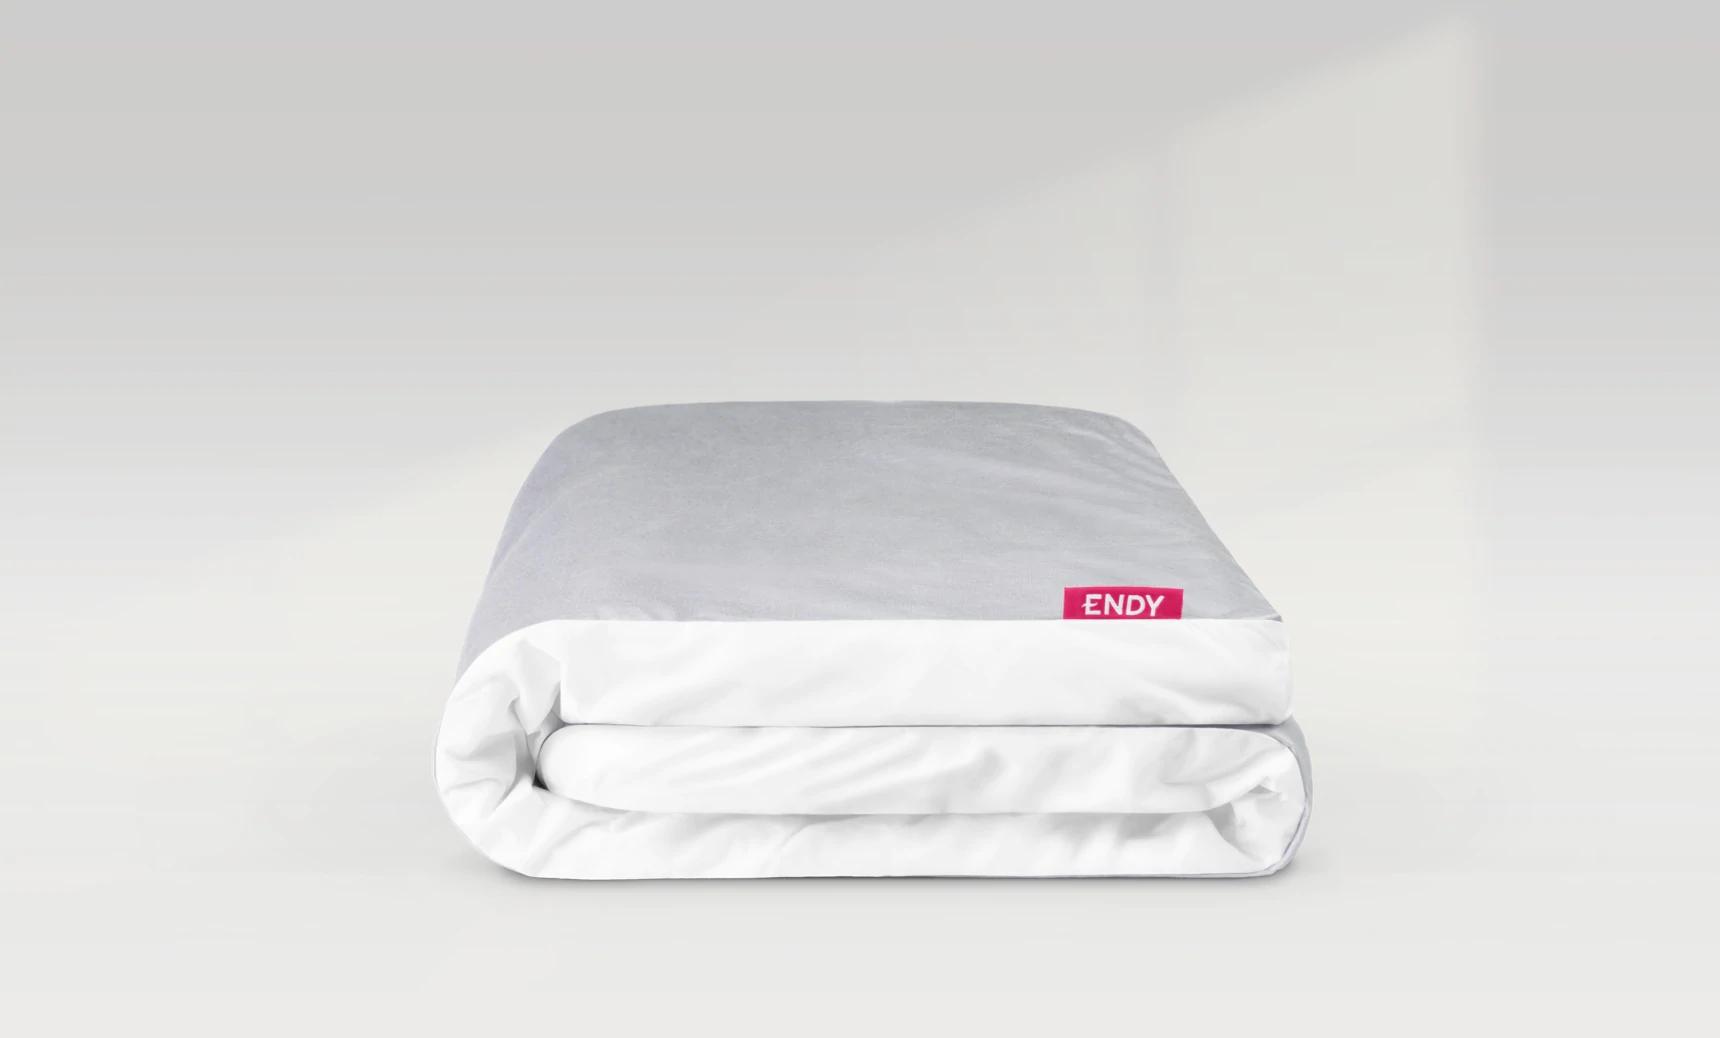 The Endy Mattress Protector